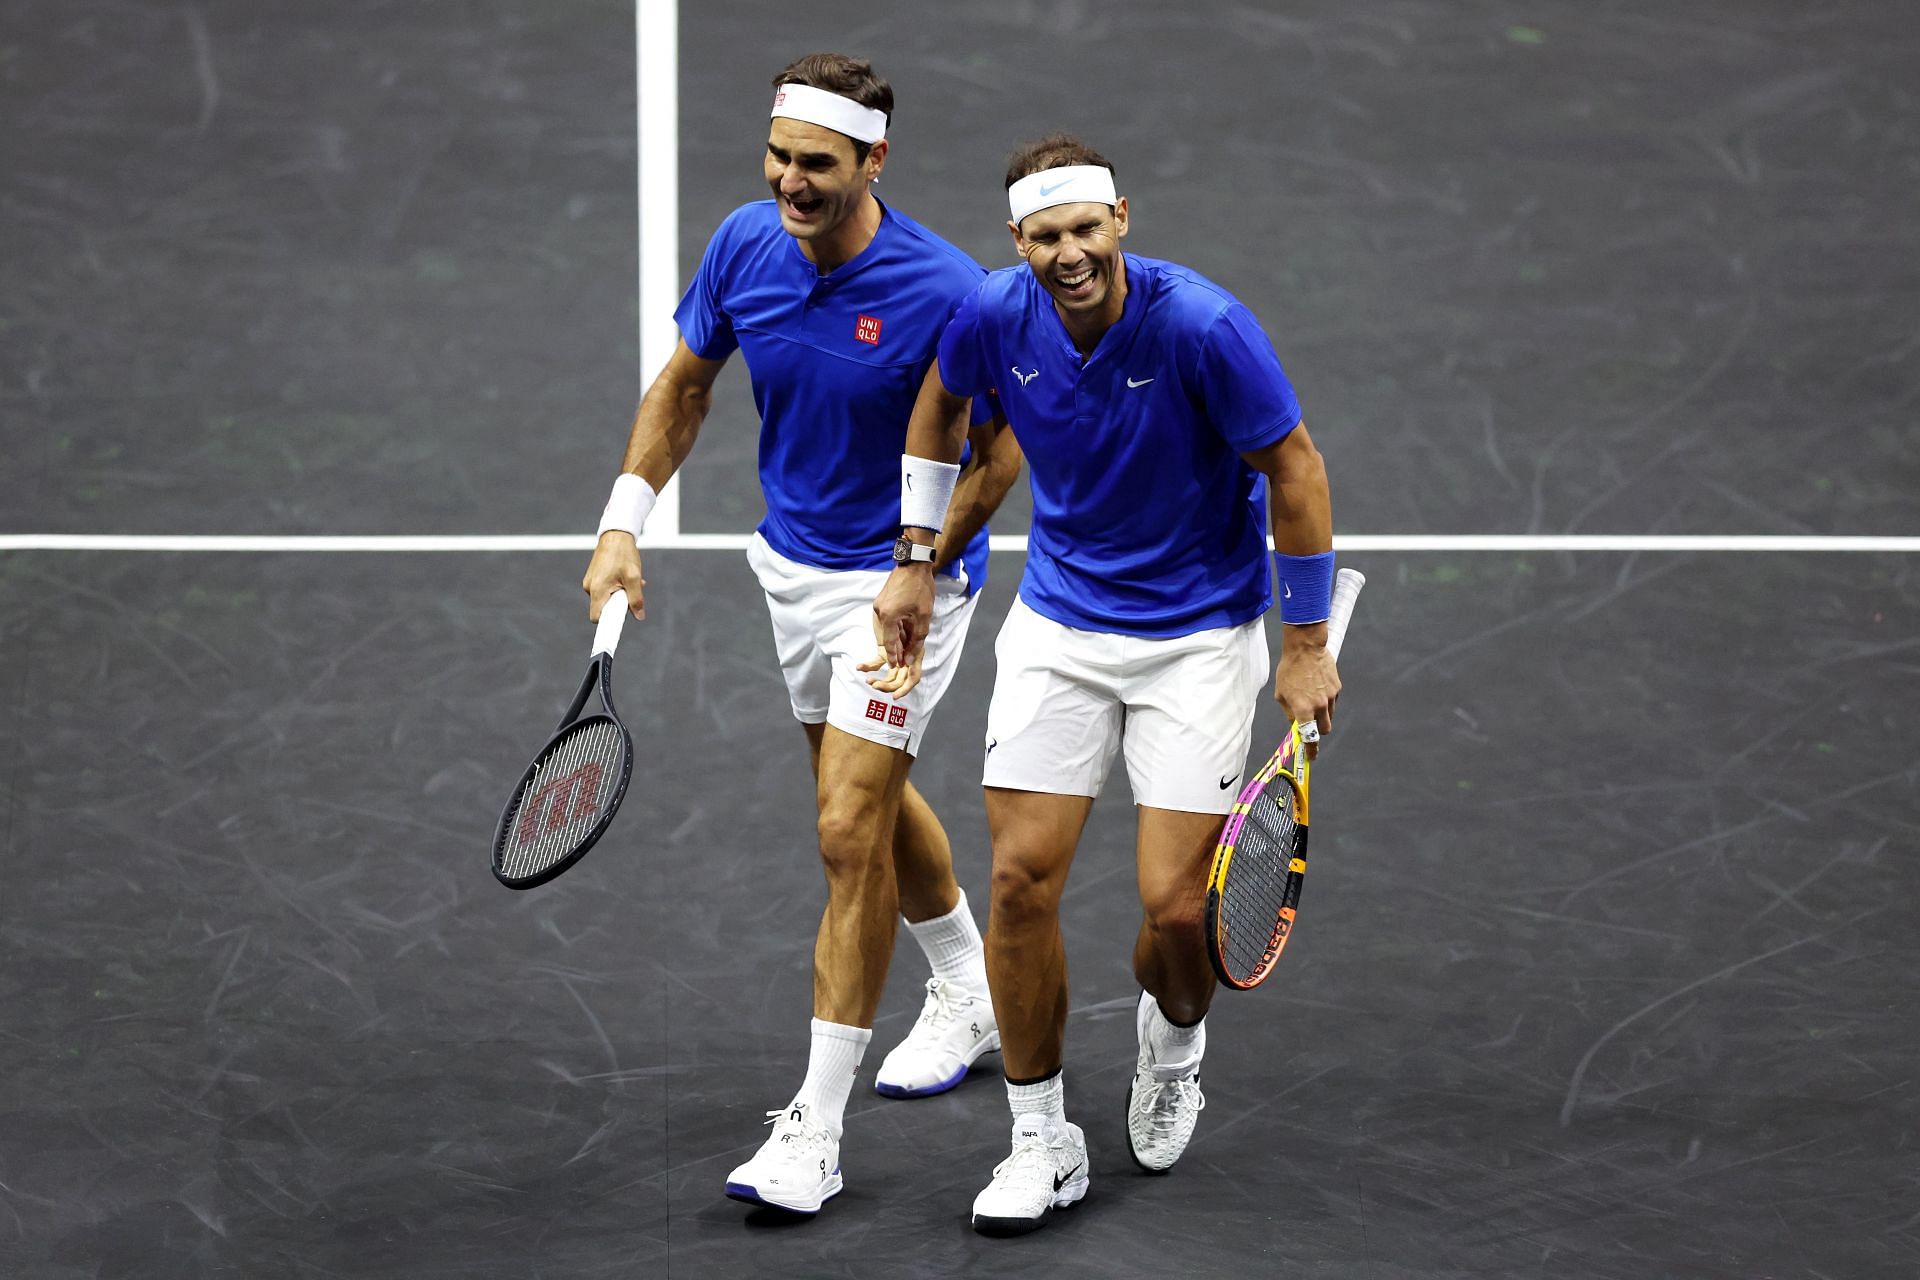 Roger Federer with Rafael Nadal for Team Europe. Photo by Luke Walker/Getty Images for Laver Cup